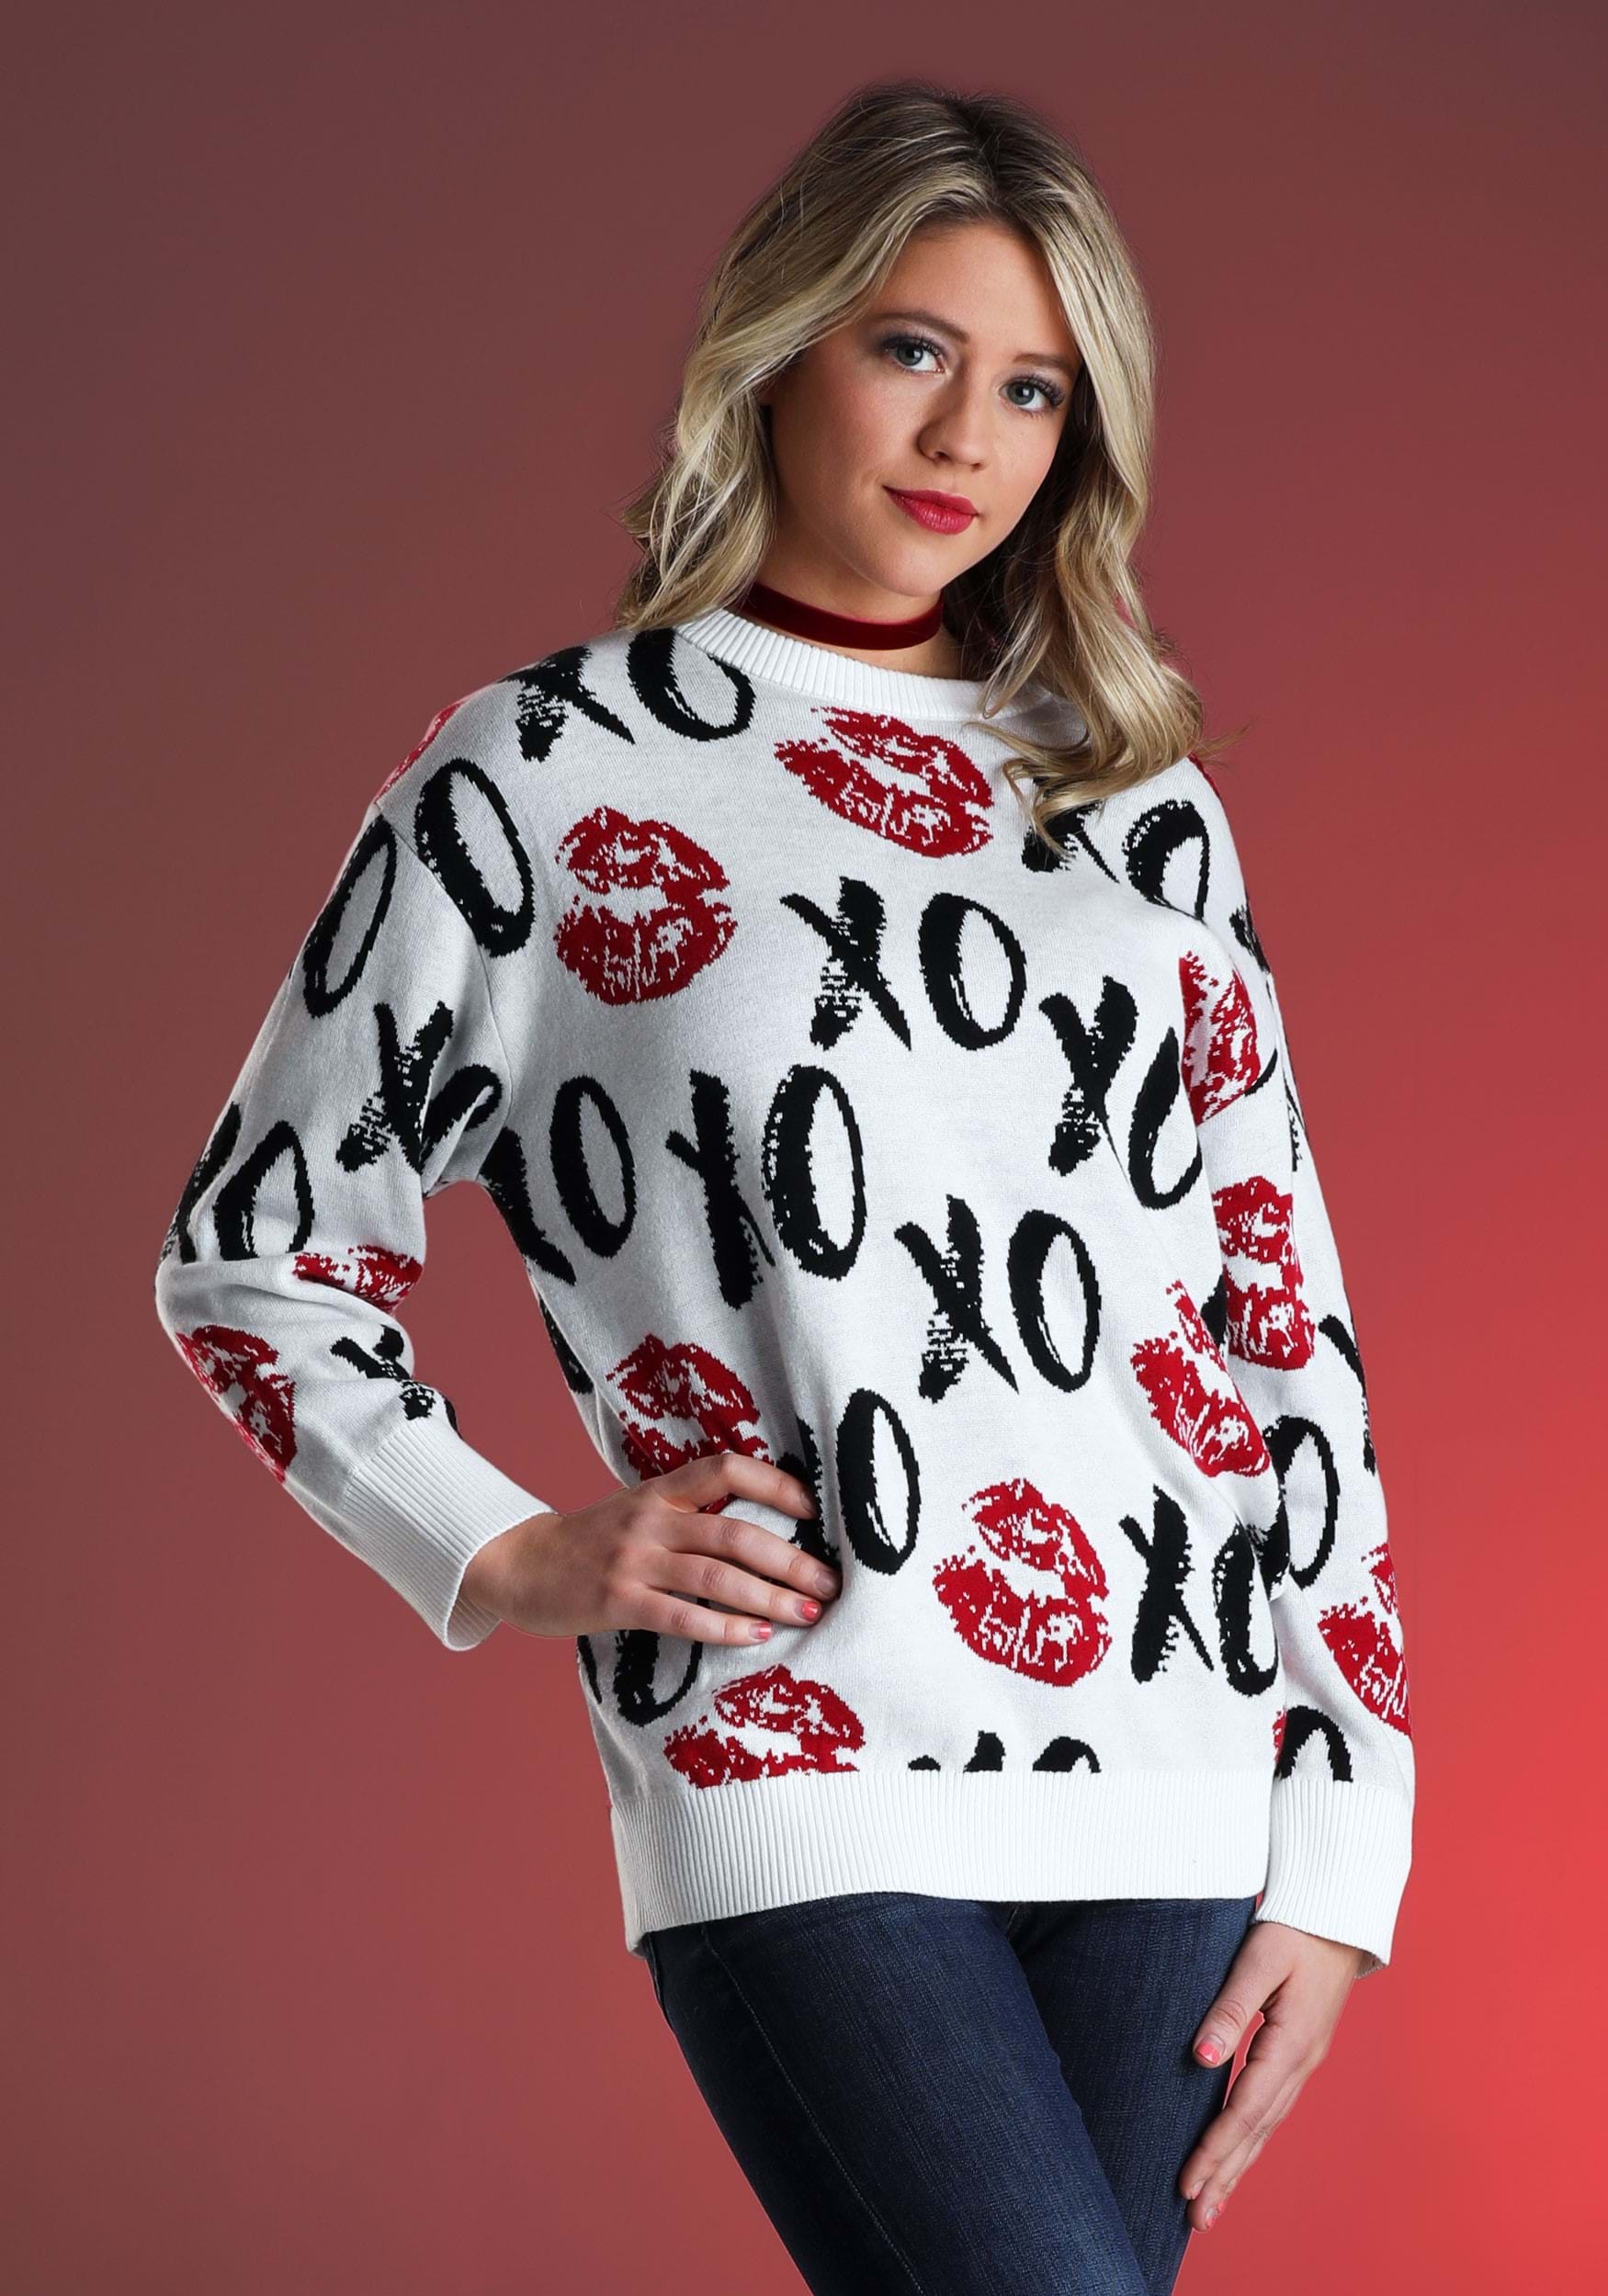 Adult Hugs and Kisses Valentine's Day Sweater